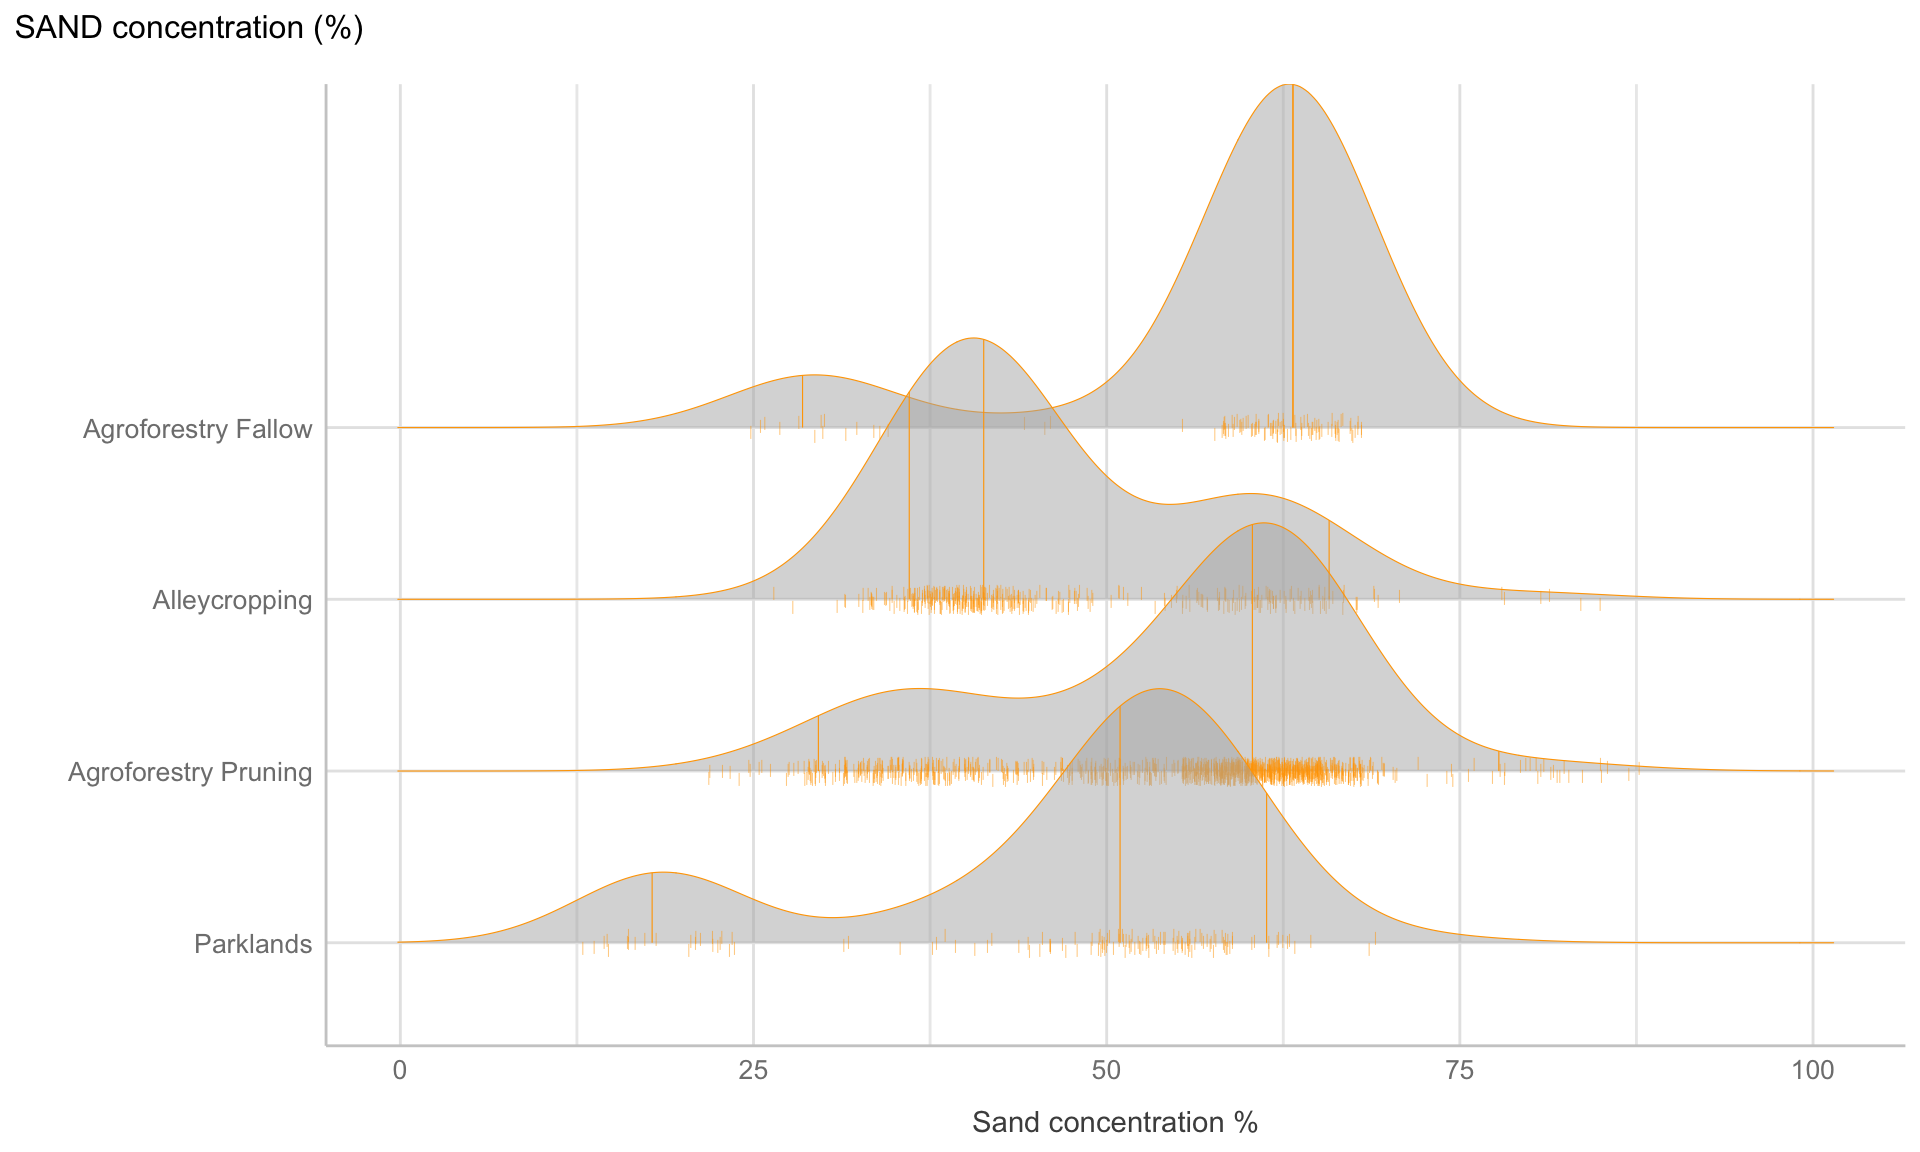 Ridge line plot: Distribution of sand content for the four different agroforestry practicest